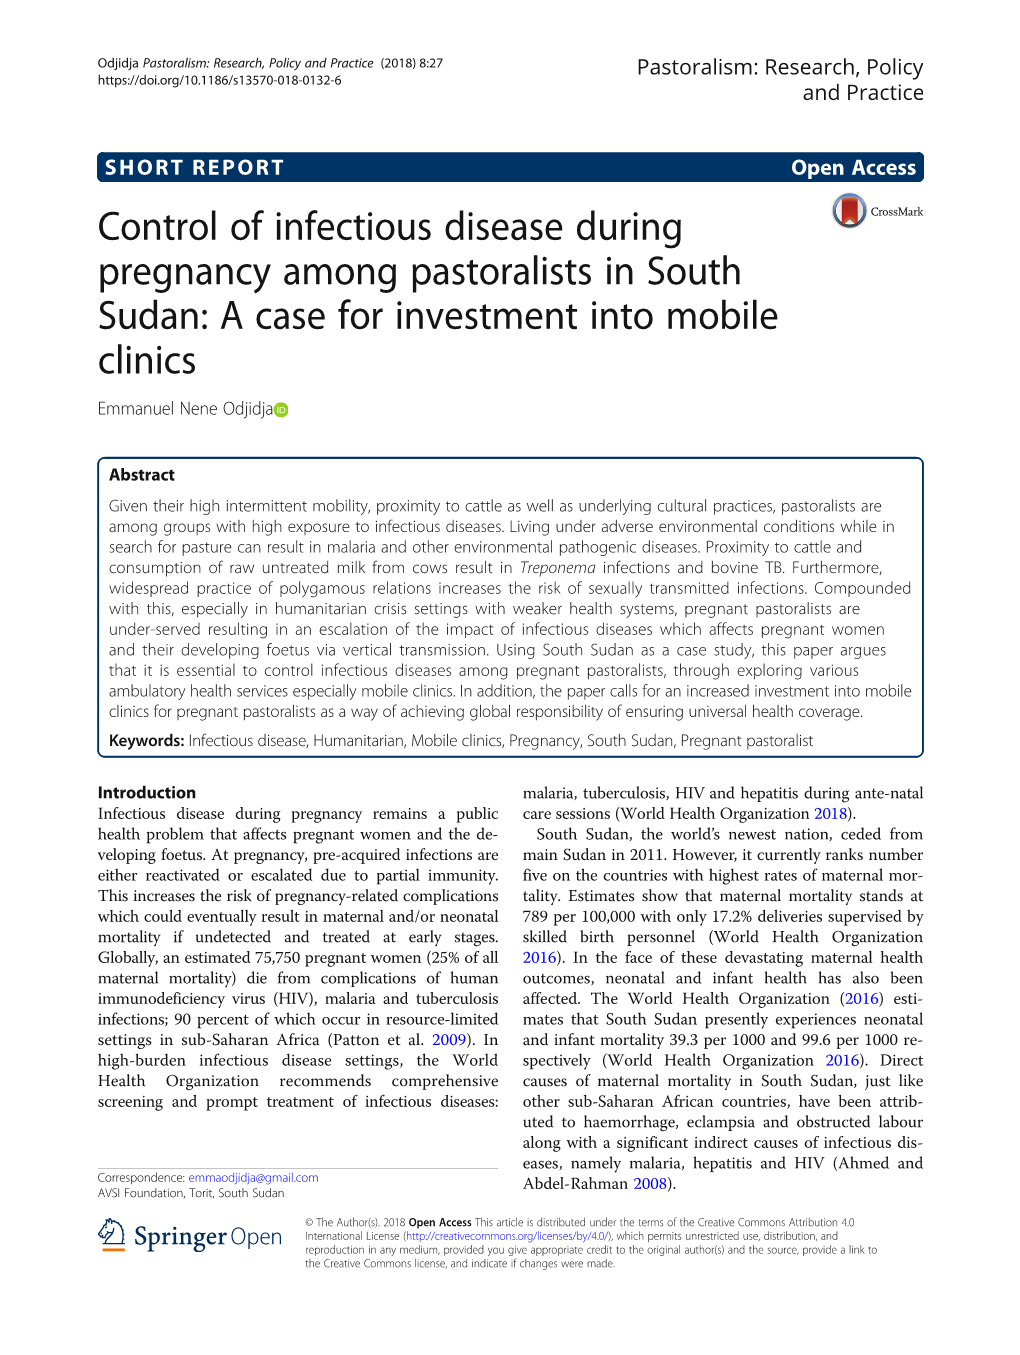 Control of Infectious Disease During Pregnancy Among Pastoralists in South Sudan: a Case for Investment Into Mobile Clinics Emmanuel Nene Odjidja